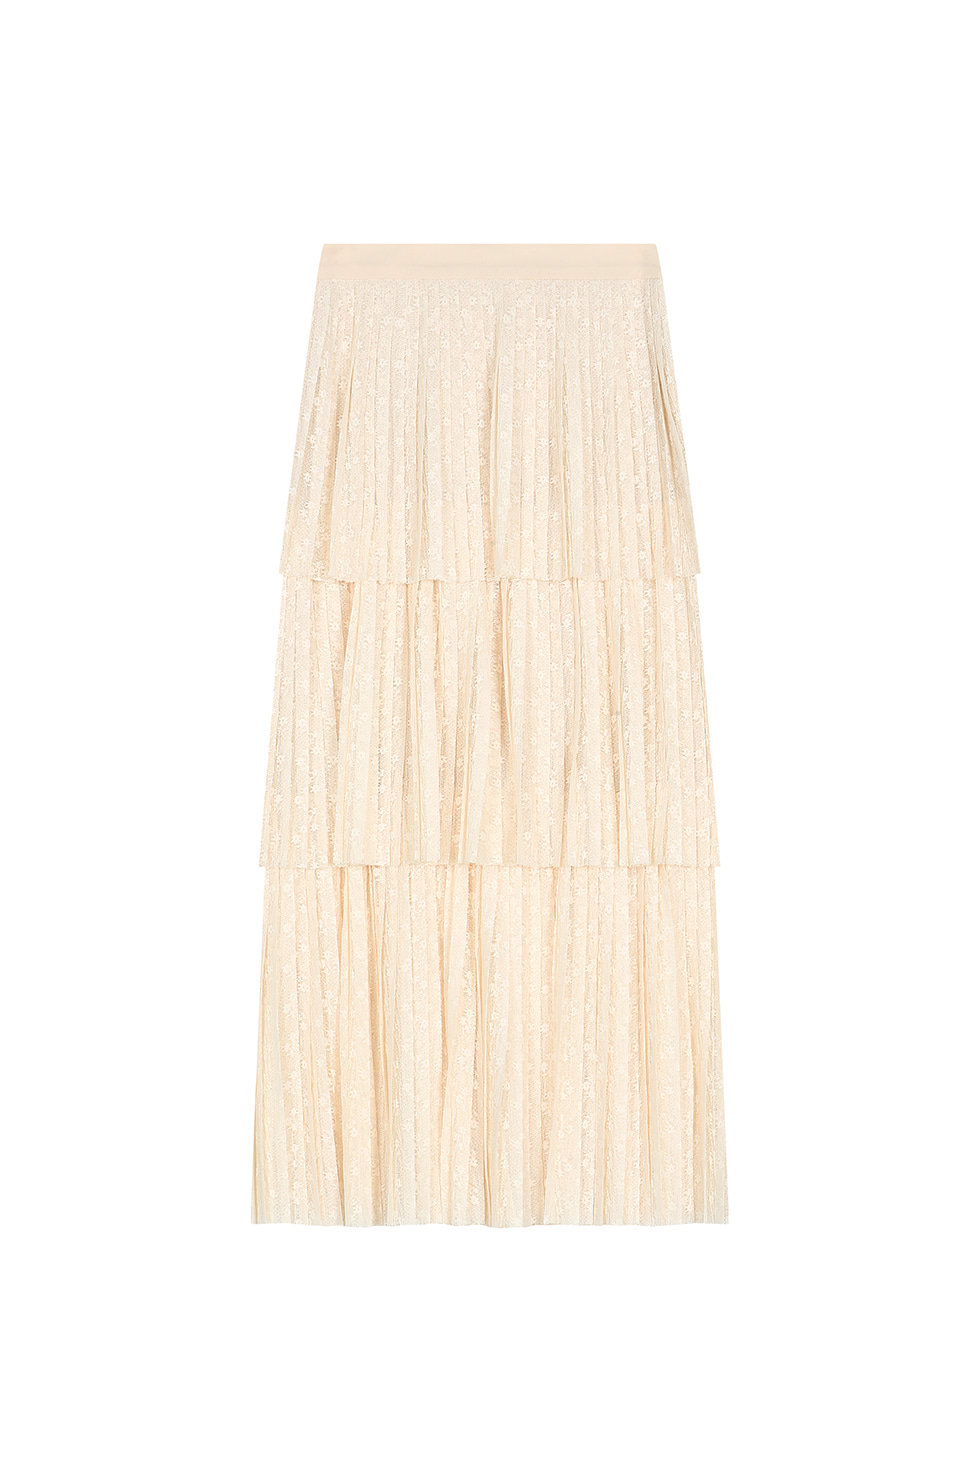 CAN CAN LACE SKIRT - IVORY